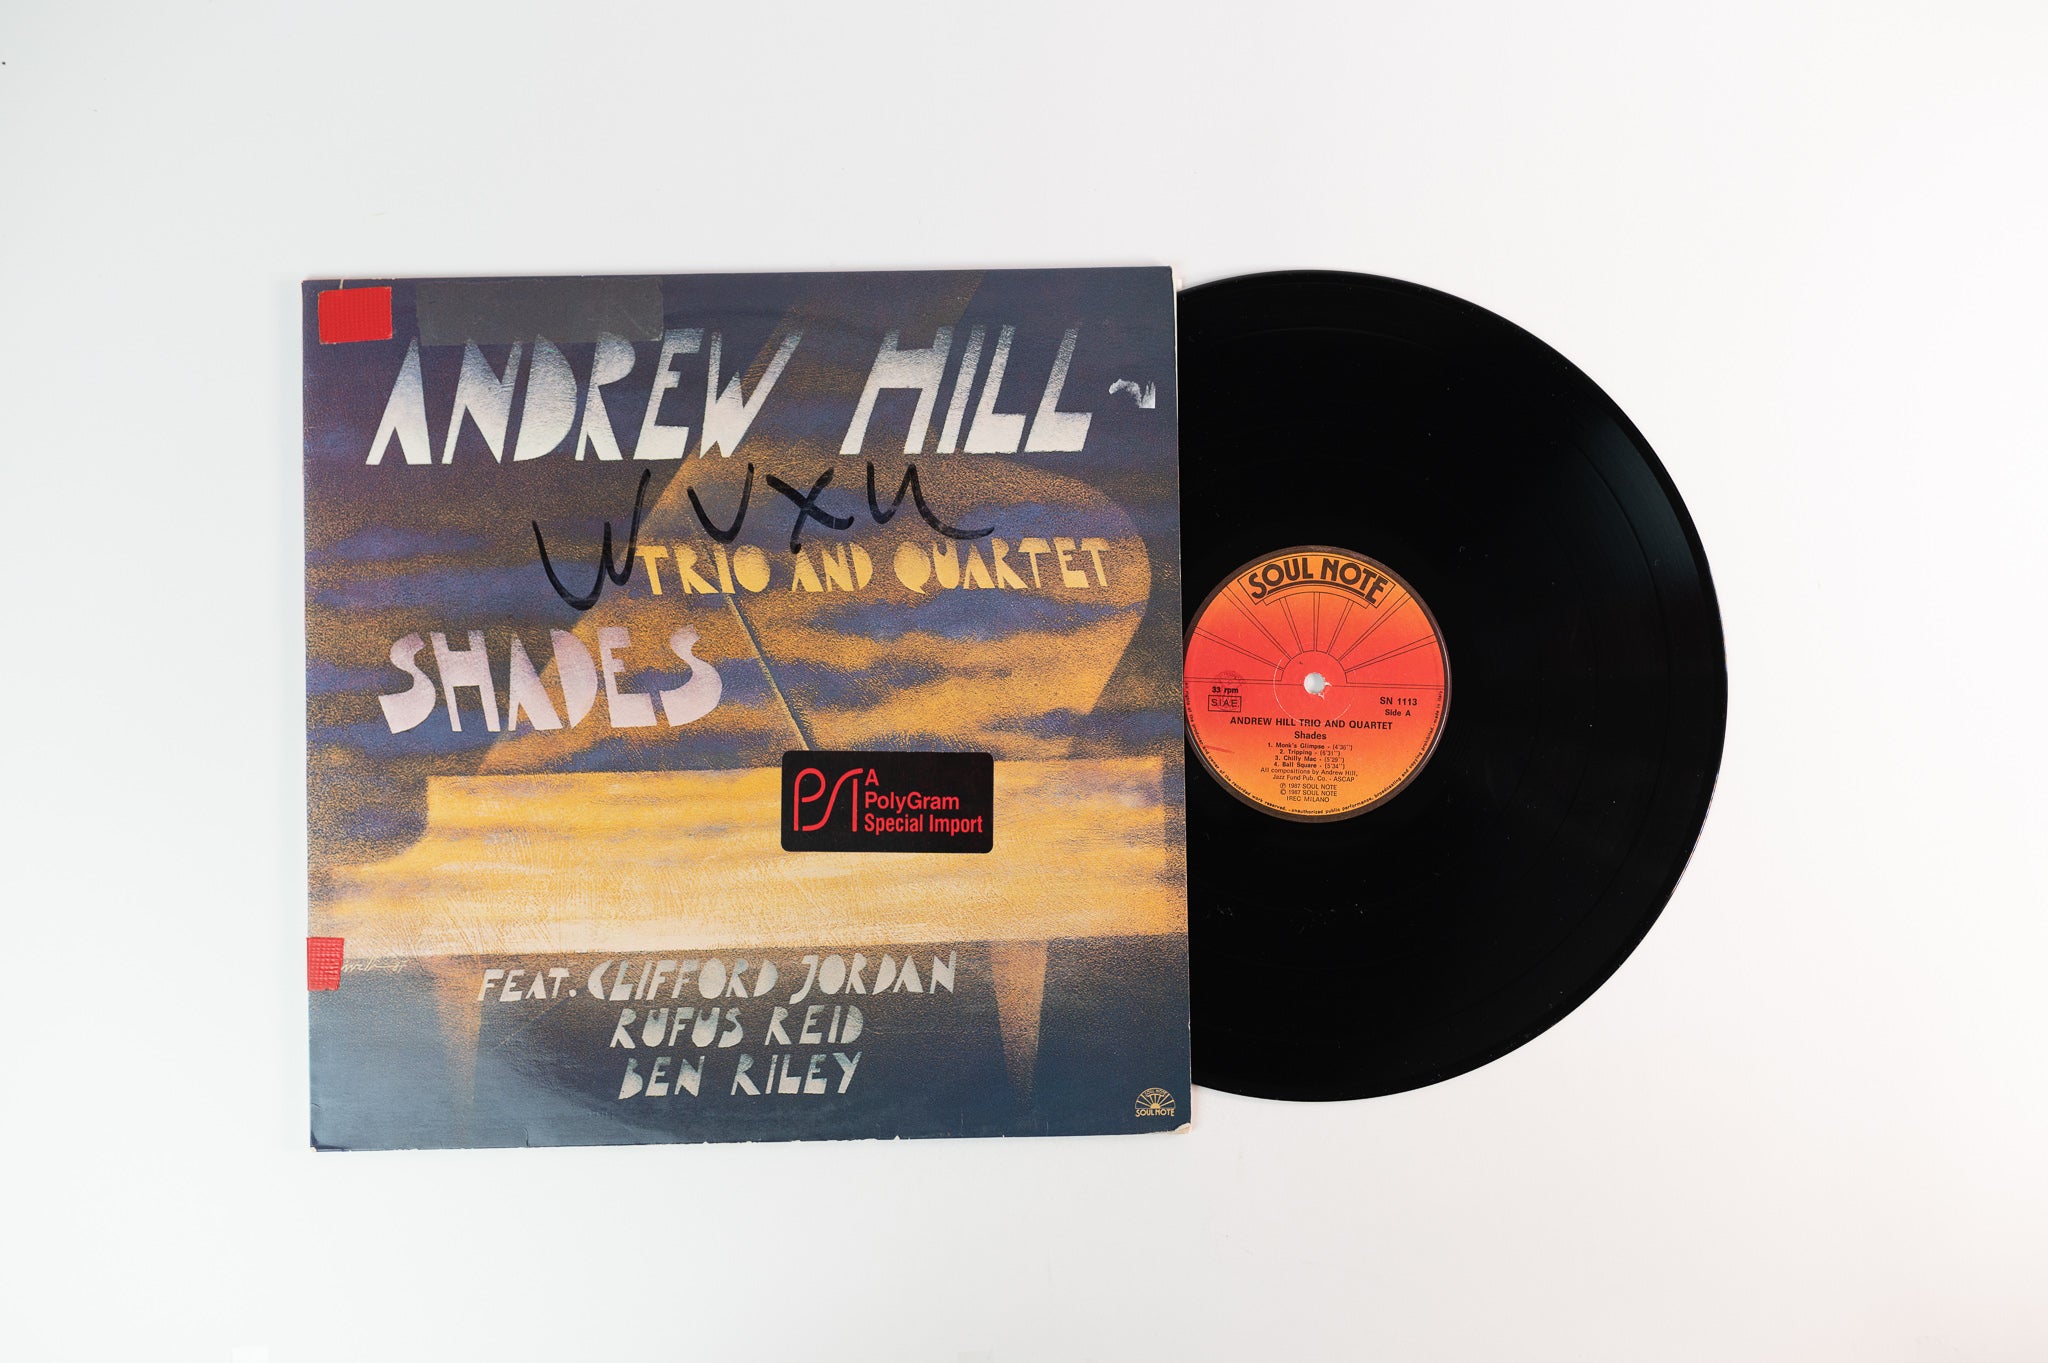 Andrew Hill Trio And Quartet - Shades on Soul Note - Italian Pressing